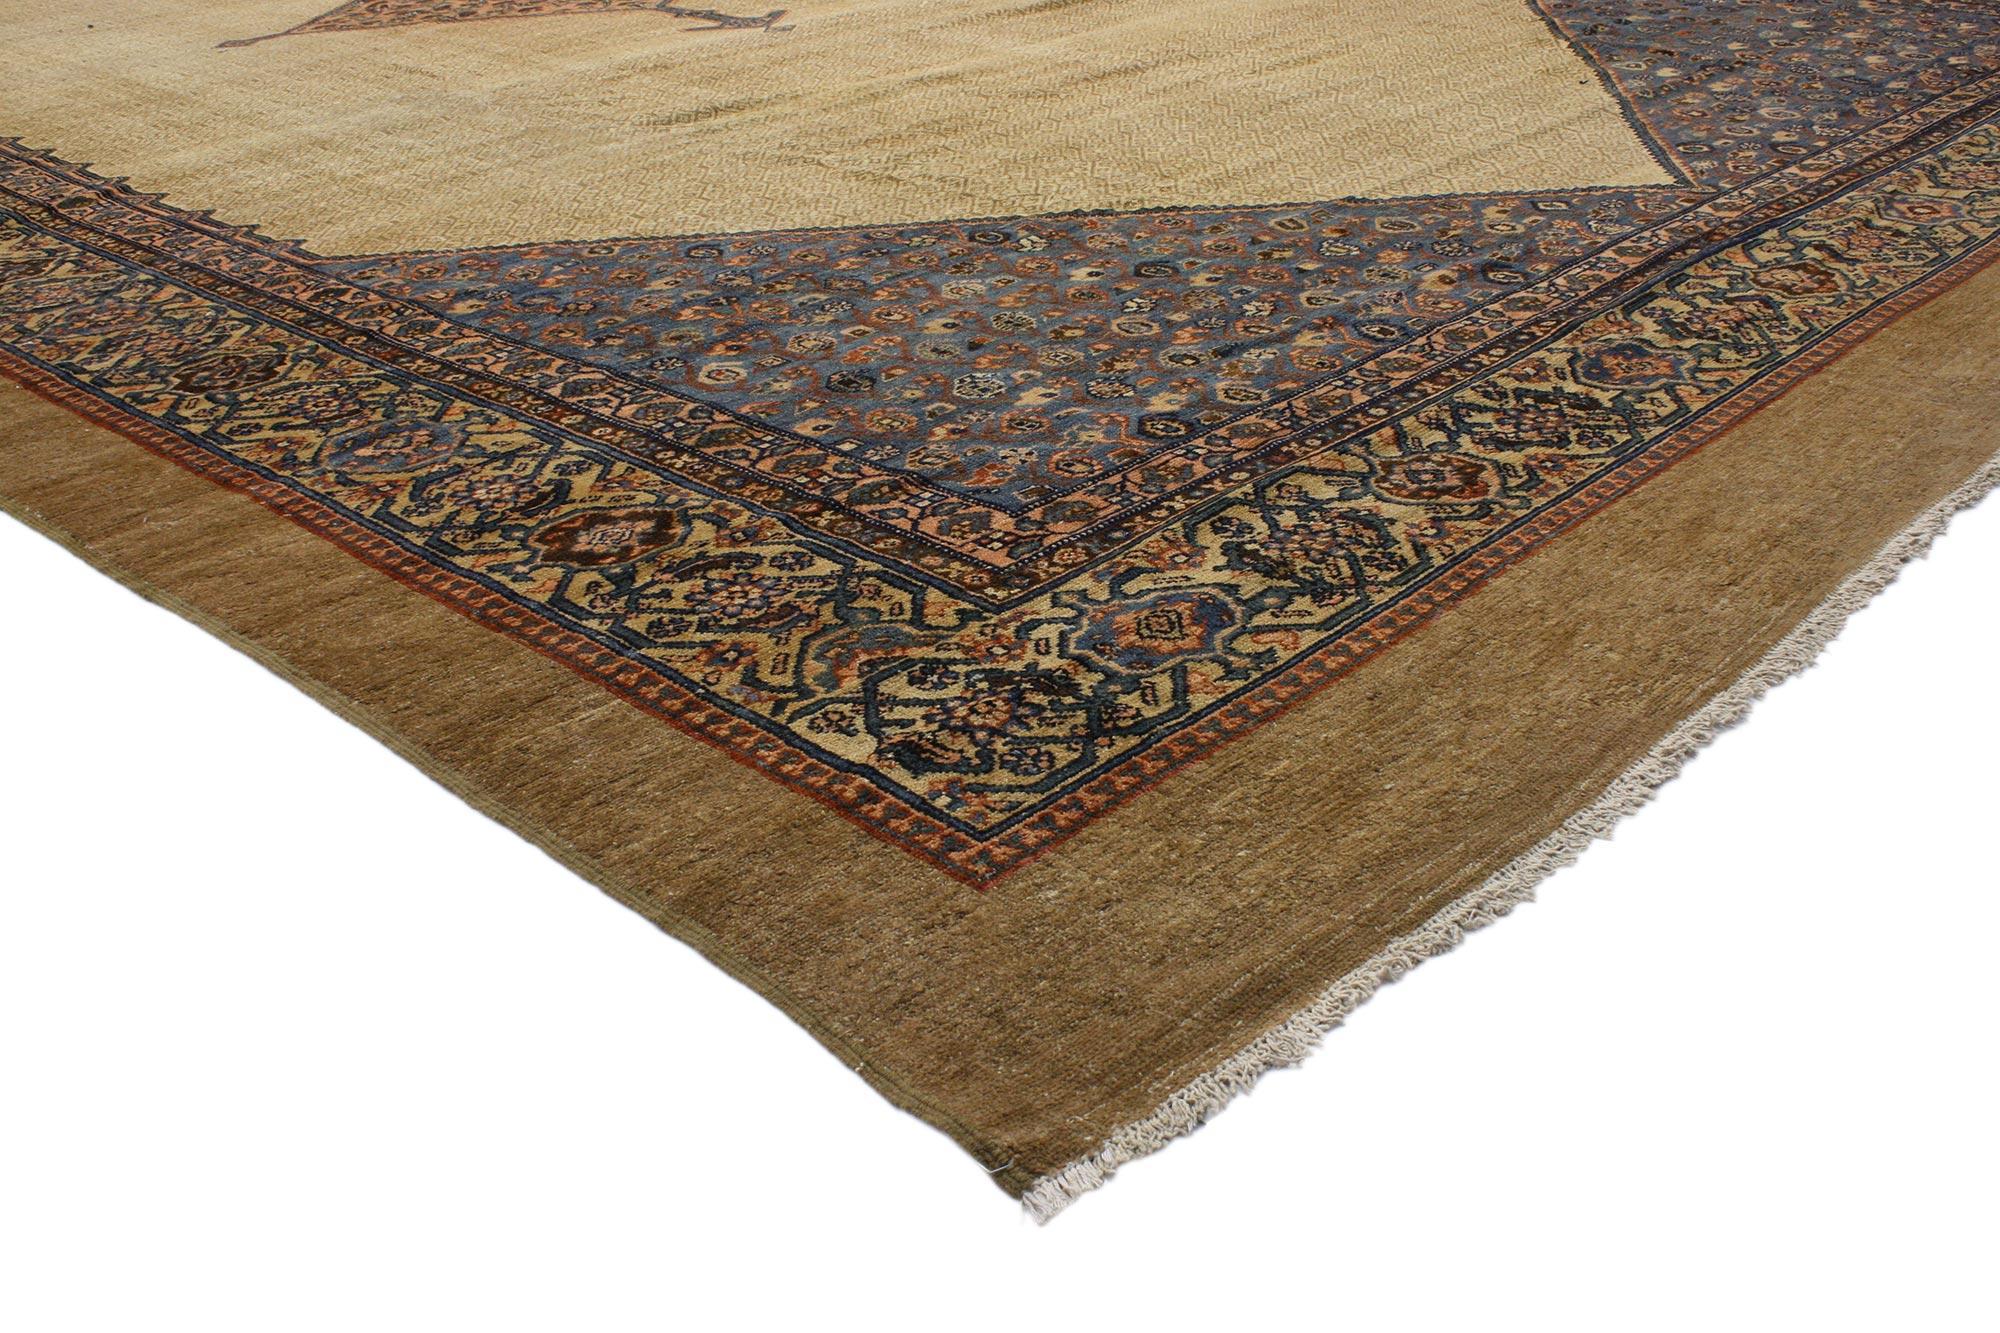 ?74396 Oversized Antique Persian Malayer rug with Camel Hair 13'06 x 23'06. Emanating sophistication and nomadic charm with rustic sensibility, this hand knotted wool and camel hair antique Persian Malayer rug beautifully embodies a modern tribal